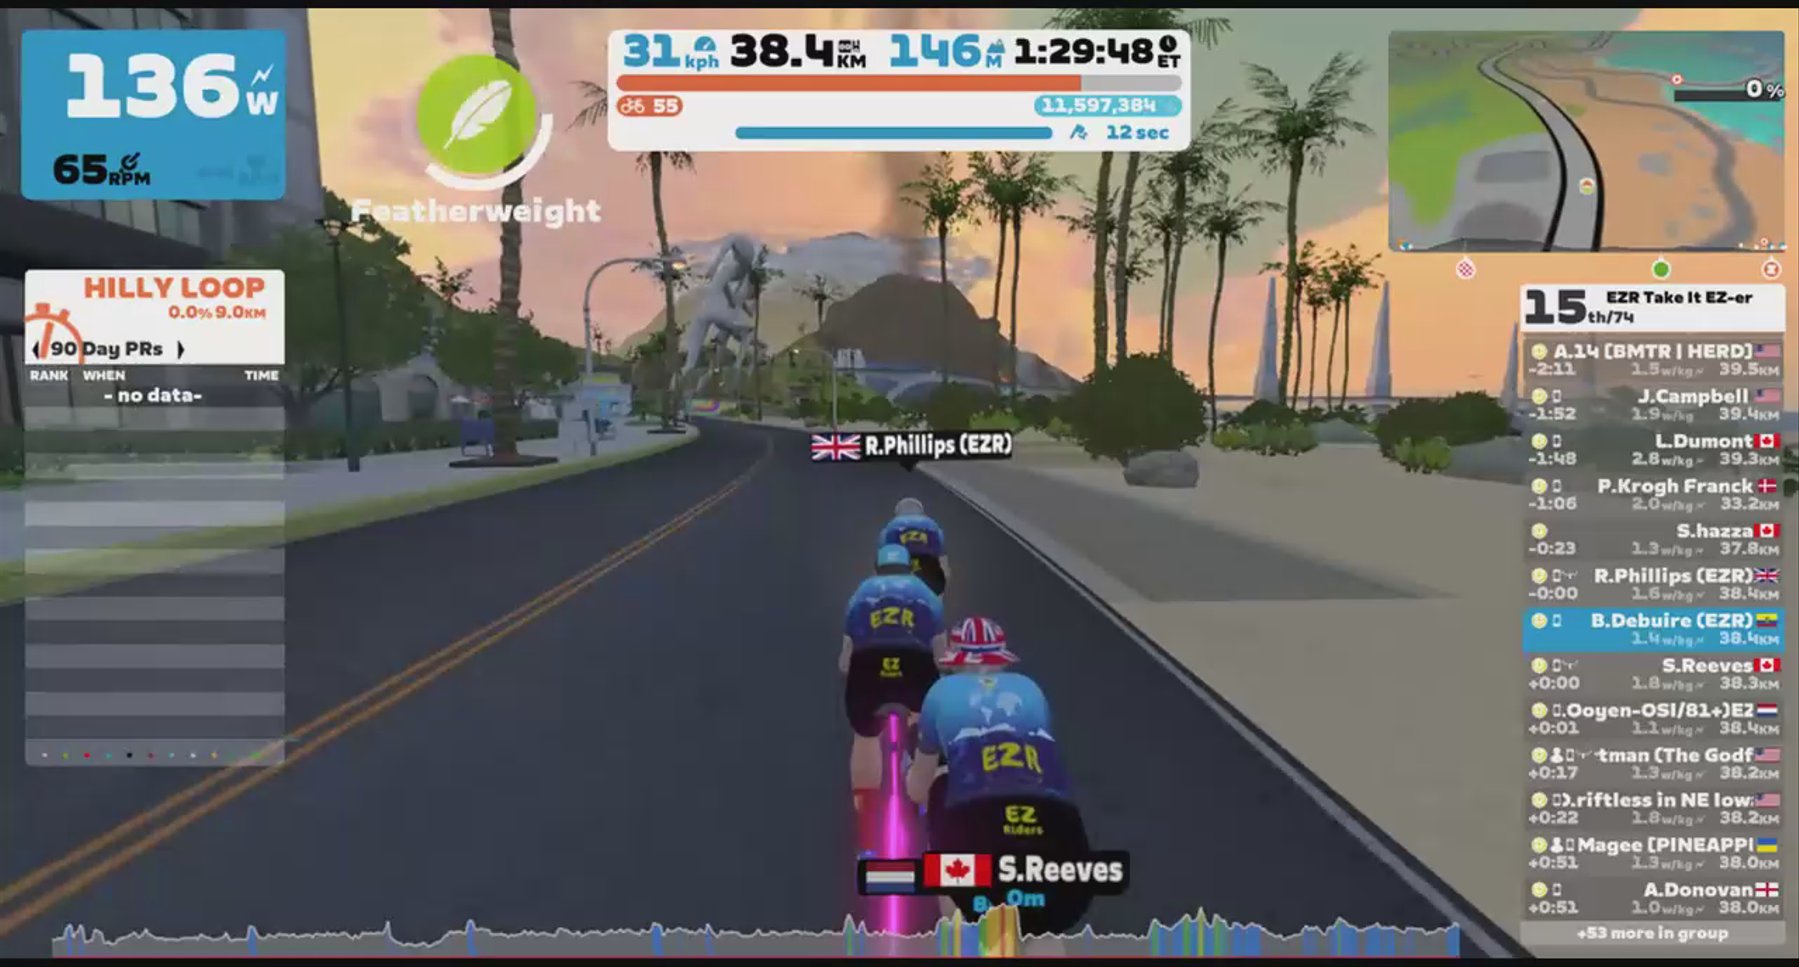 Zwift - Group Ride: EZR Take It EZ-er (D) on Spiral into the Volcano in Watopia